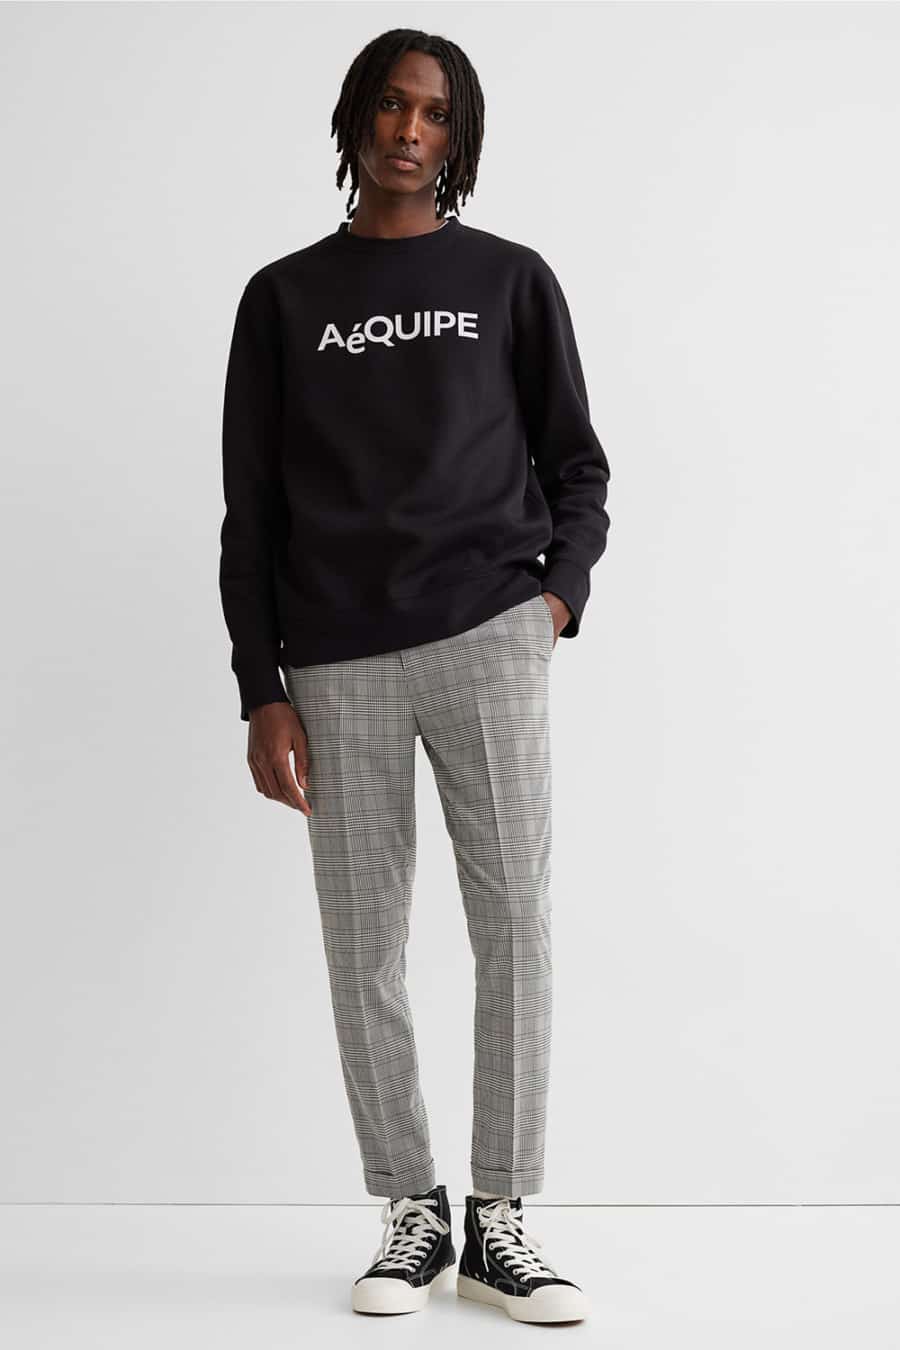 Men's grey checked pants, logo sweatshirt and black high-tops streetwear outfit